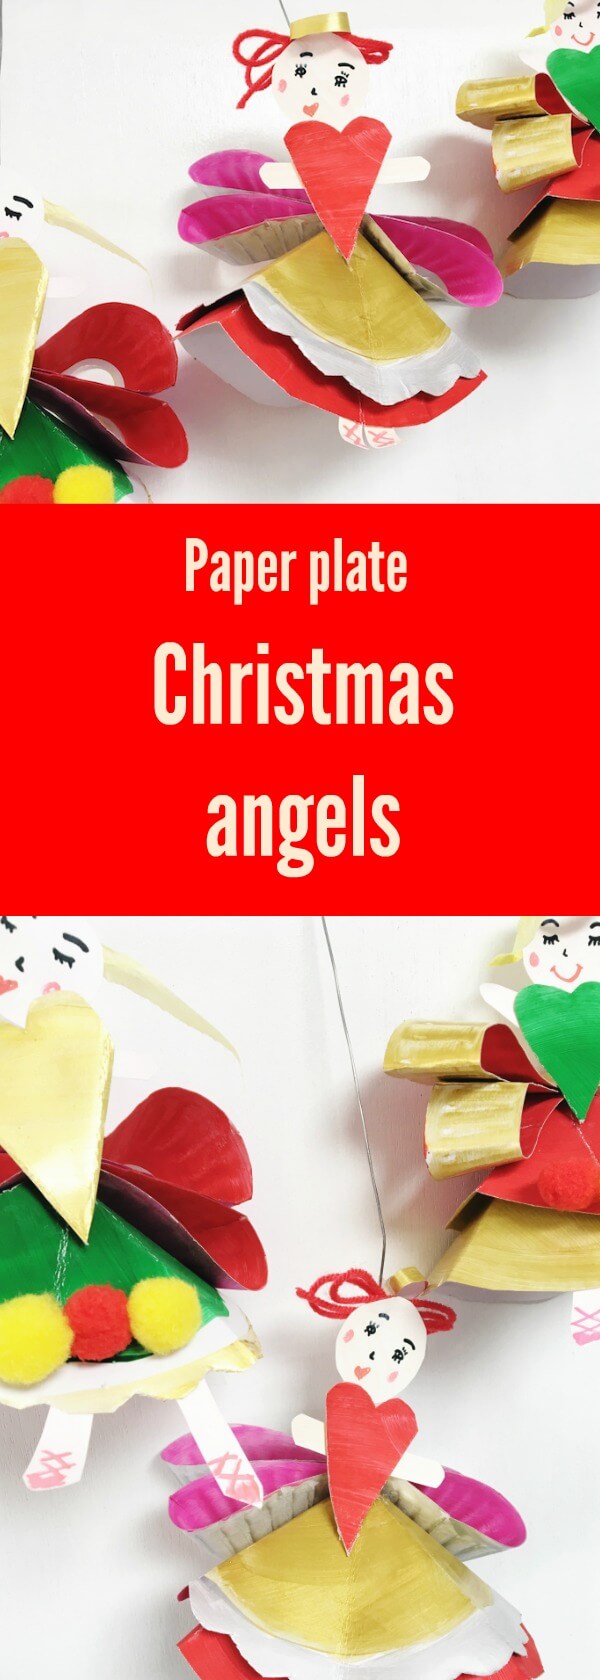 Paper plate Christmas angels – a fun and easy kids craft for Christmas #Christmas #christmascraft #paperplates #angel